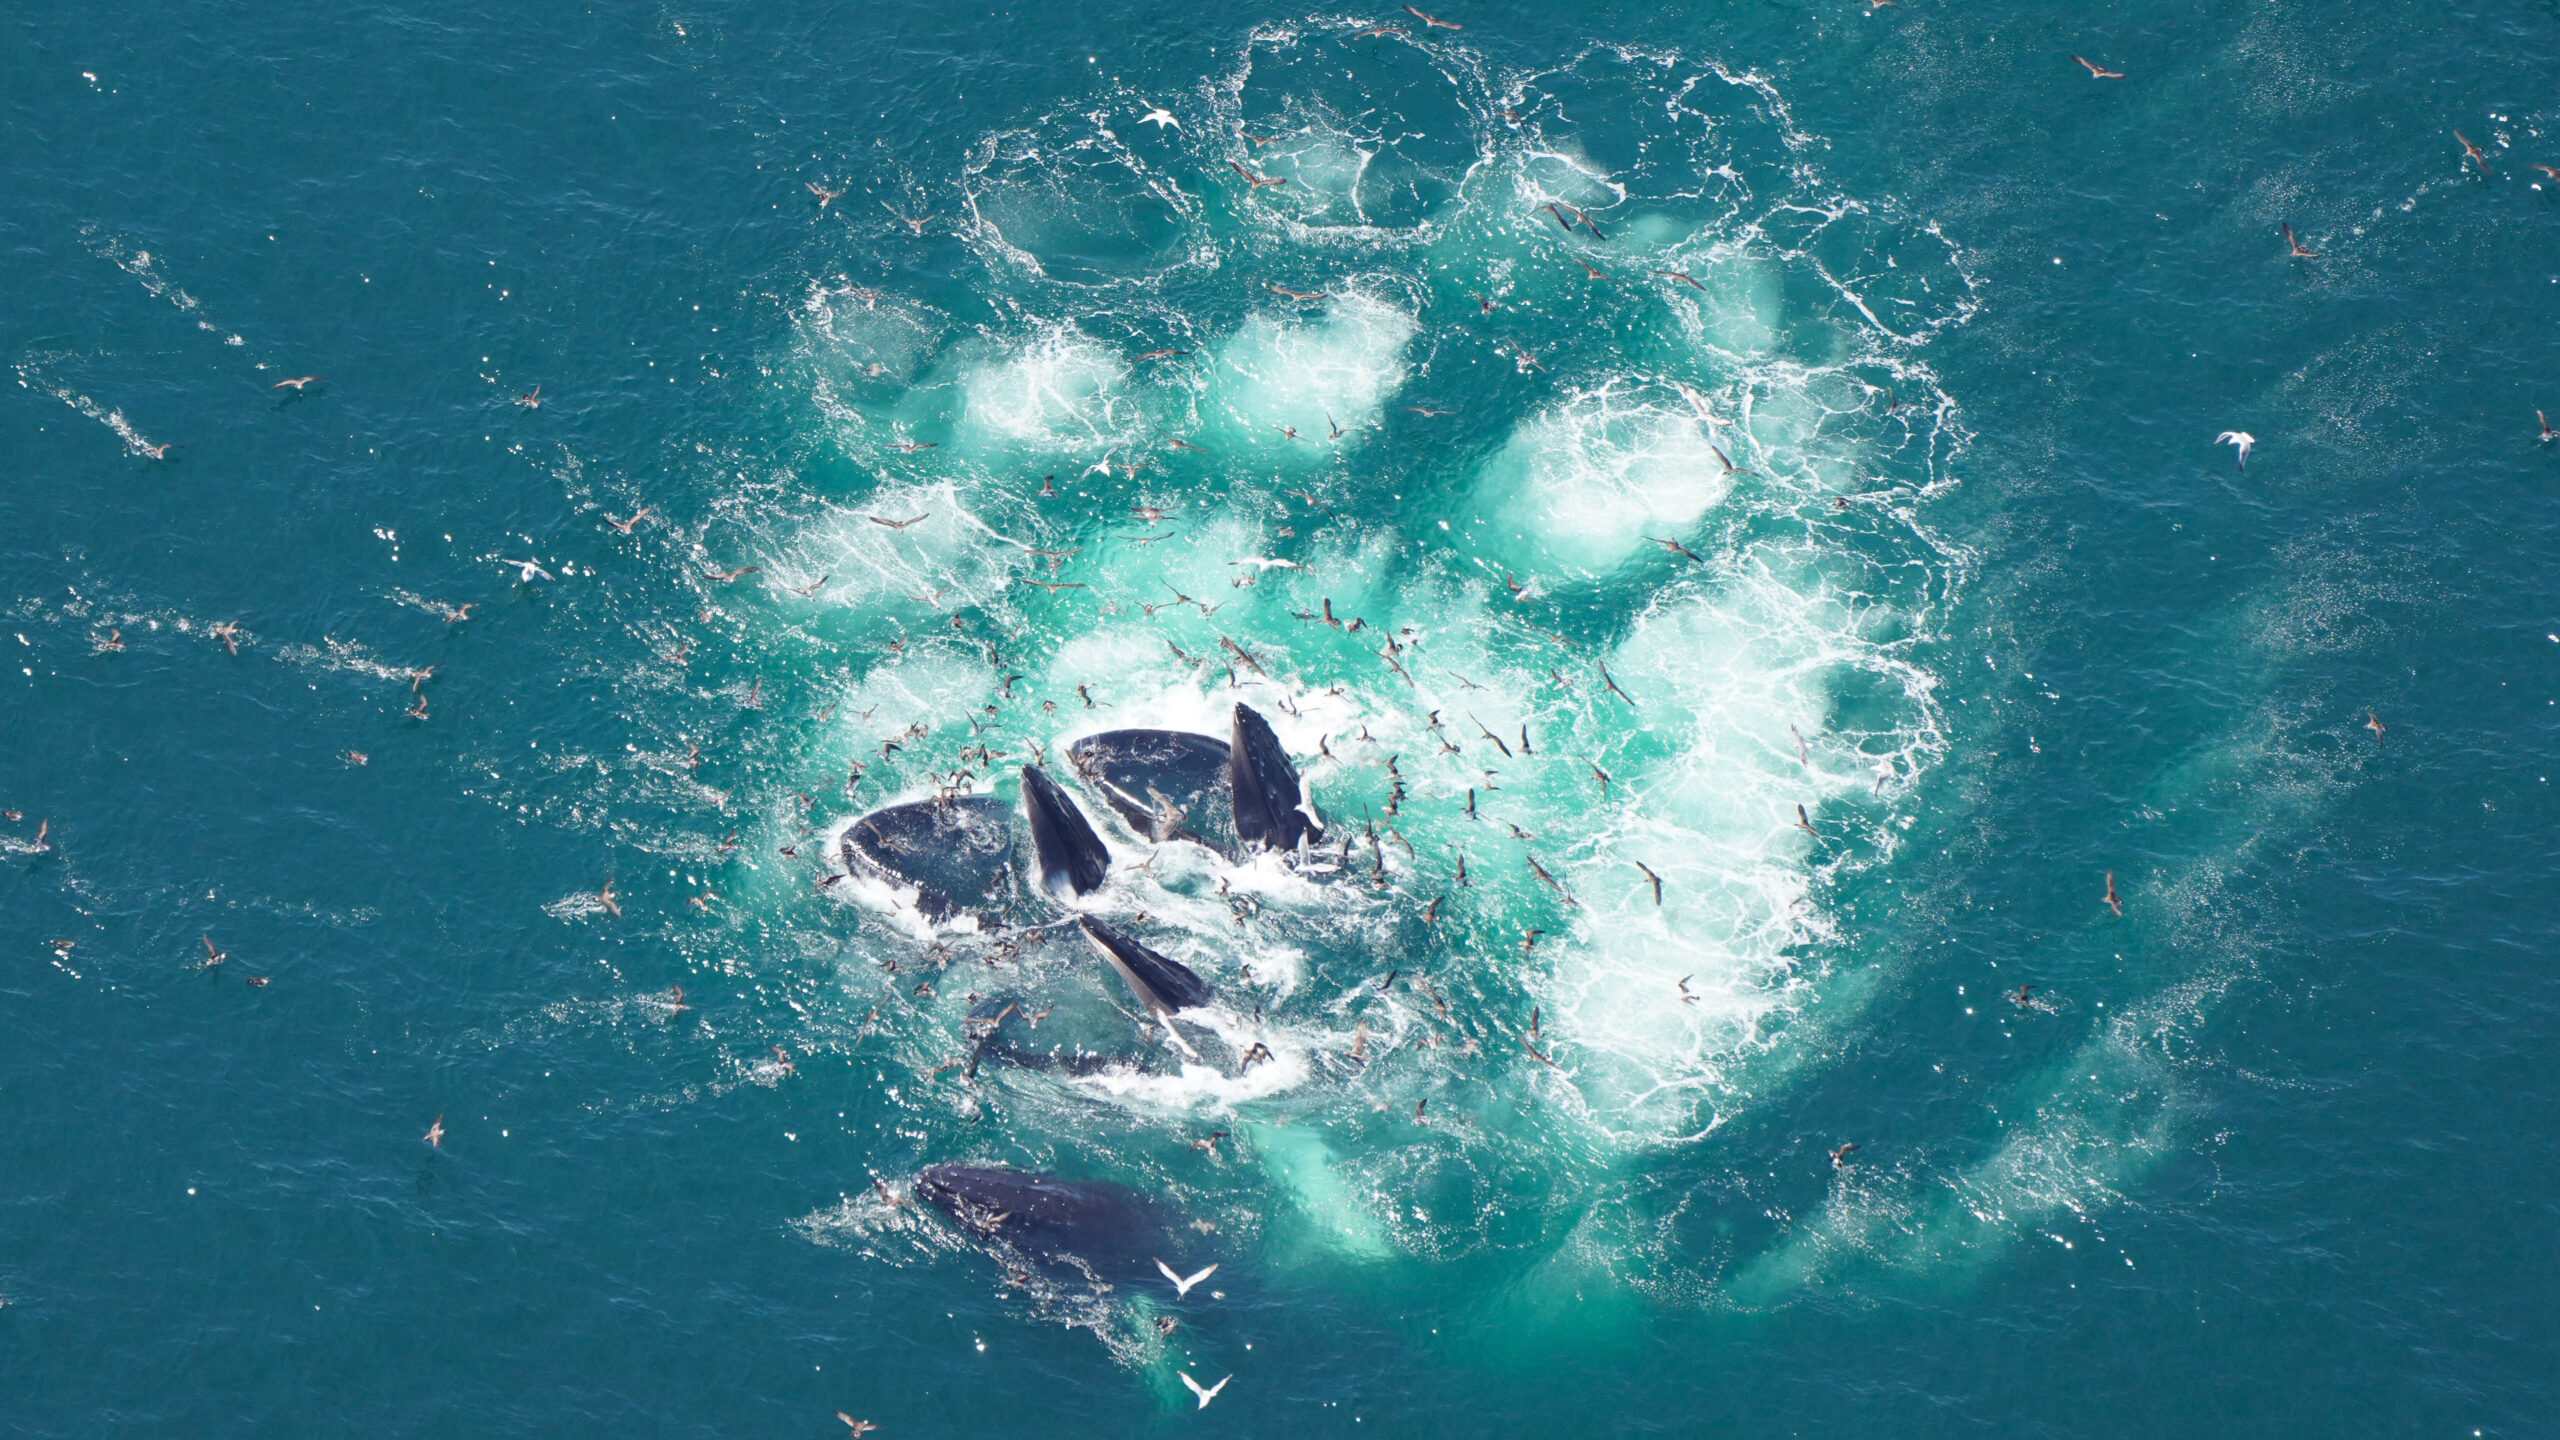 Humpbacks with their mouths open